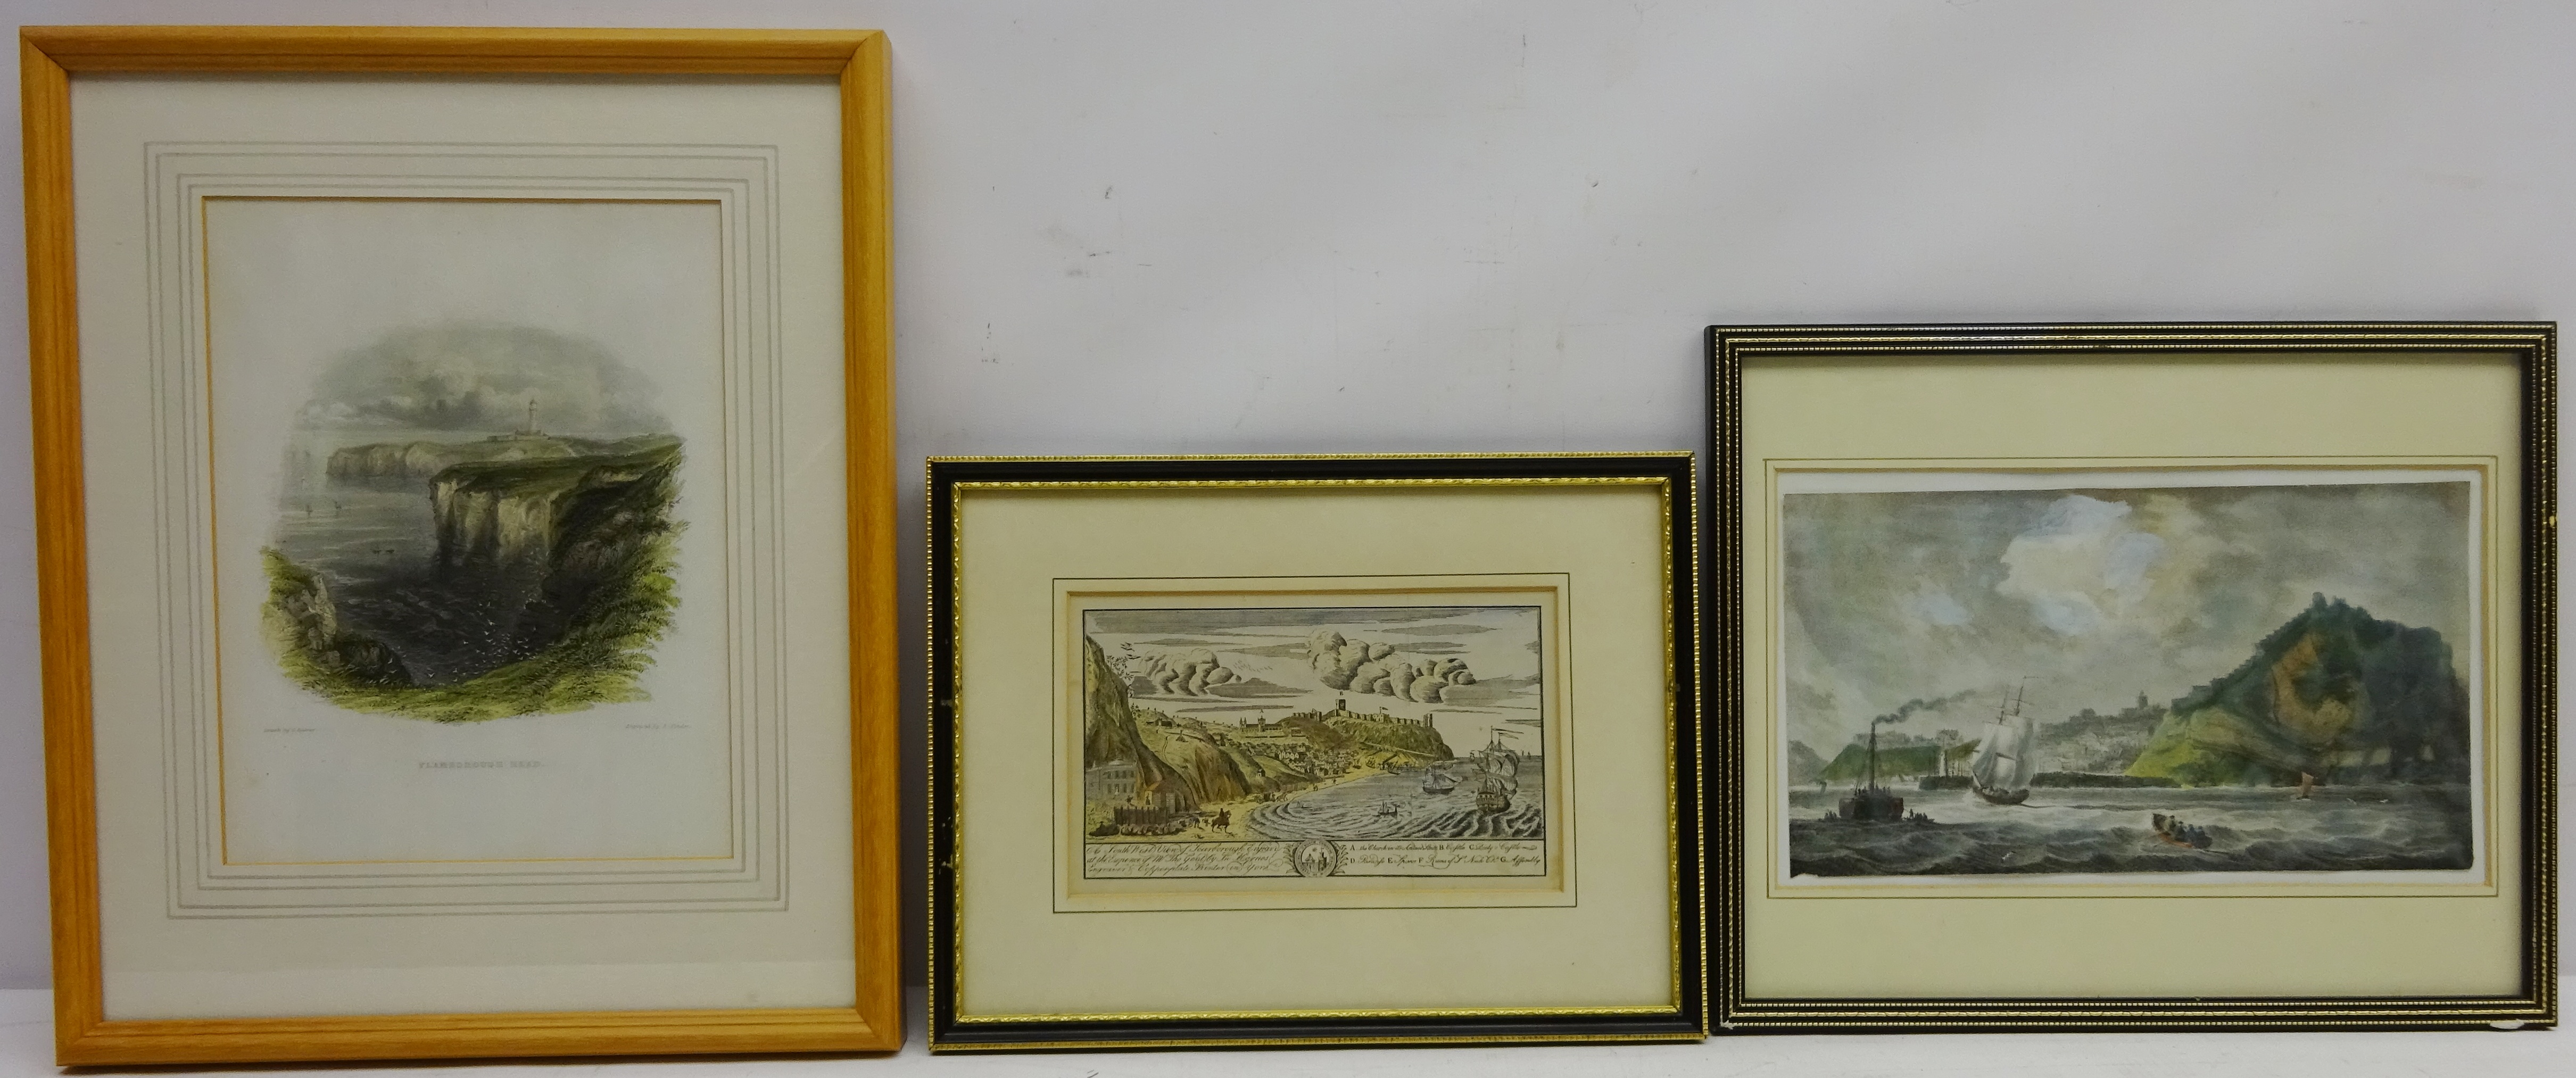 Three 19th century engravings hand coloured - 'A South West View of Scarborough at the Expense of